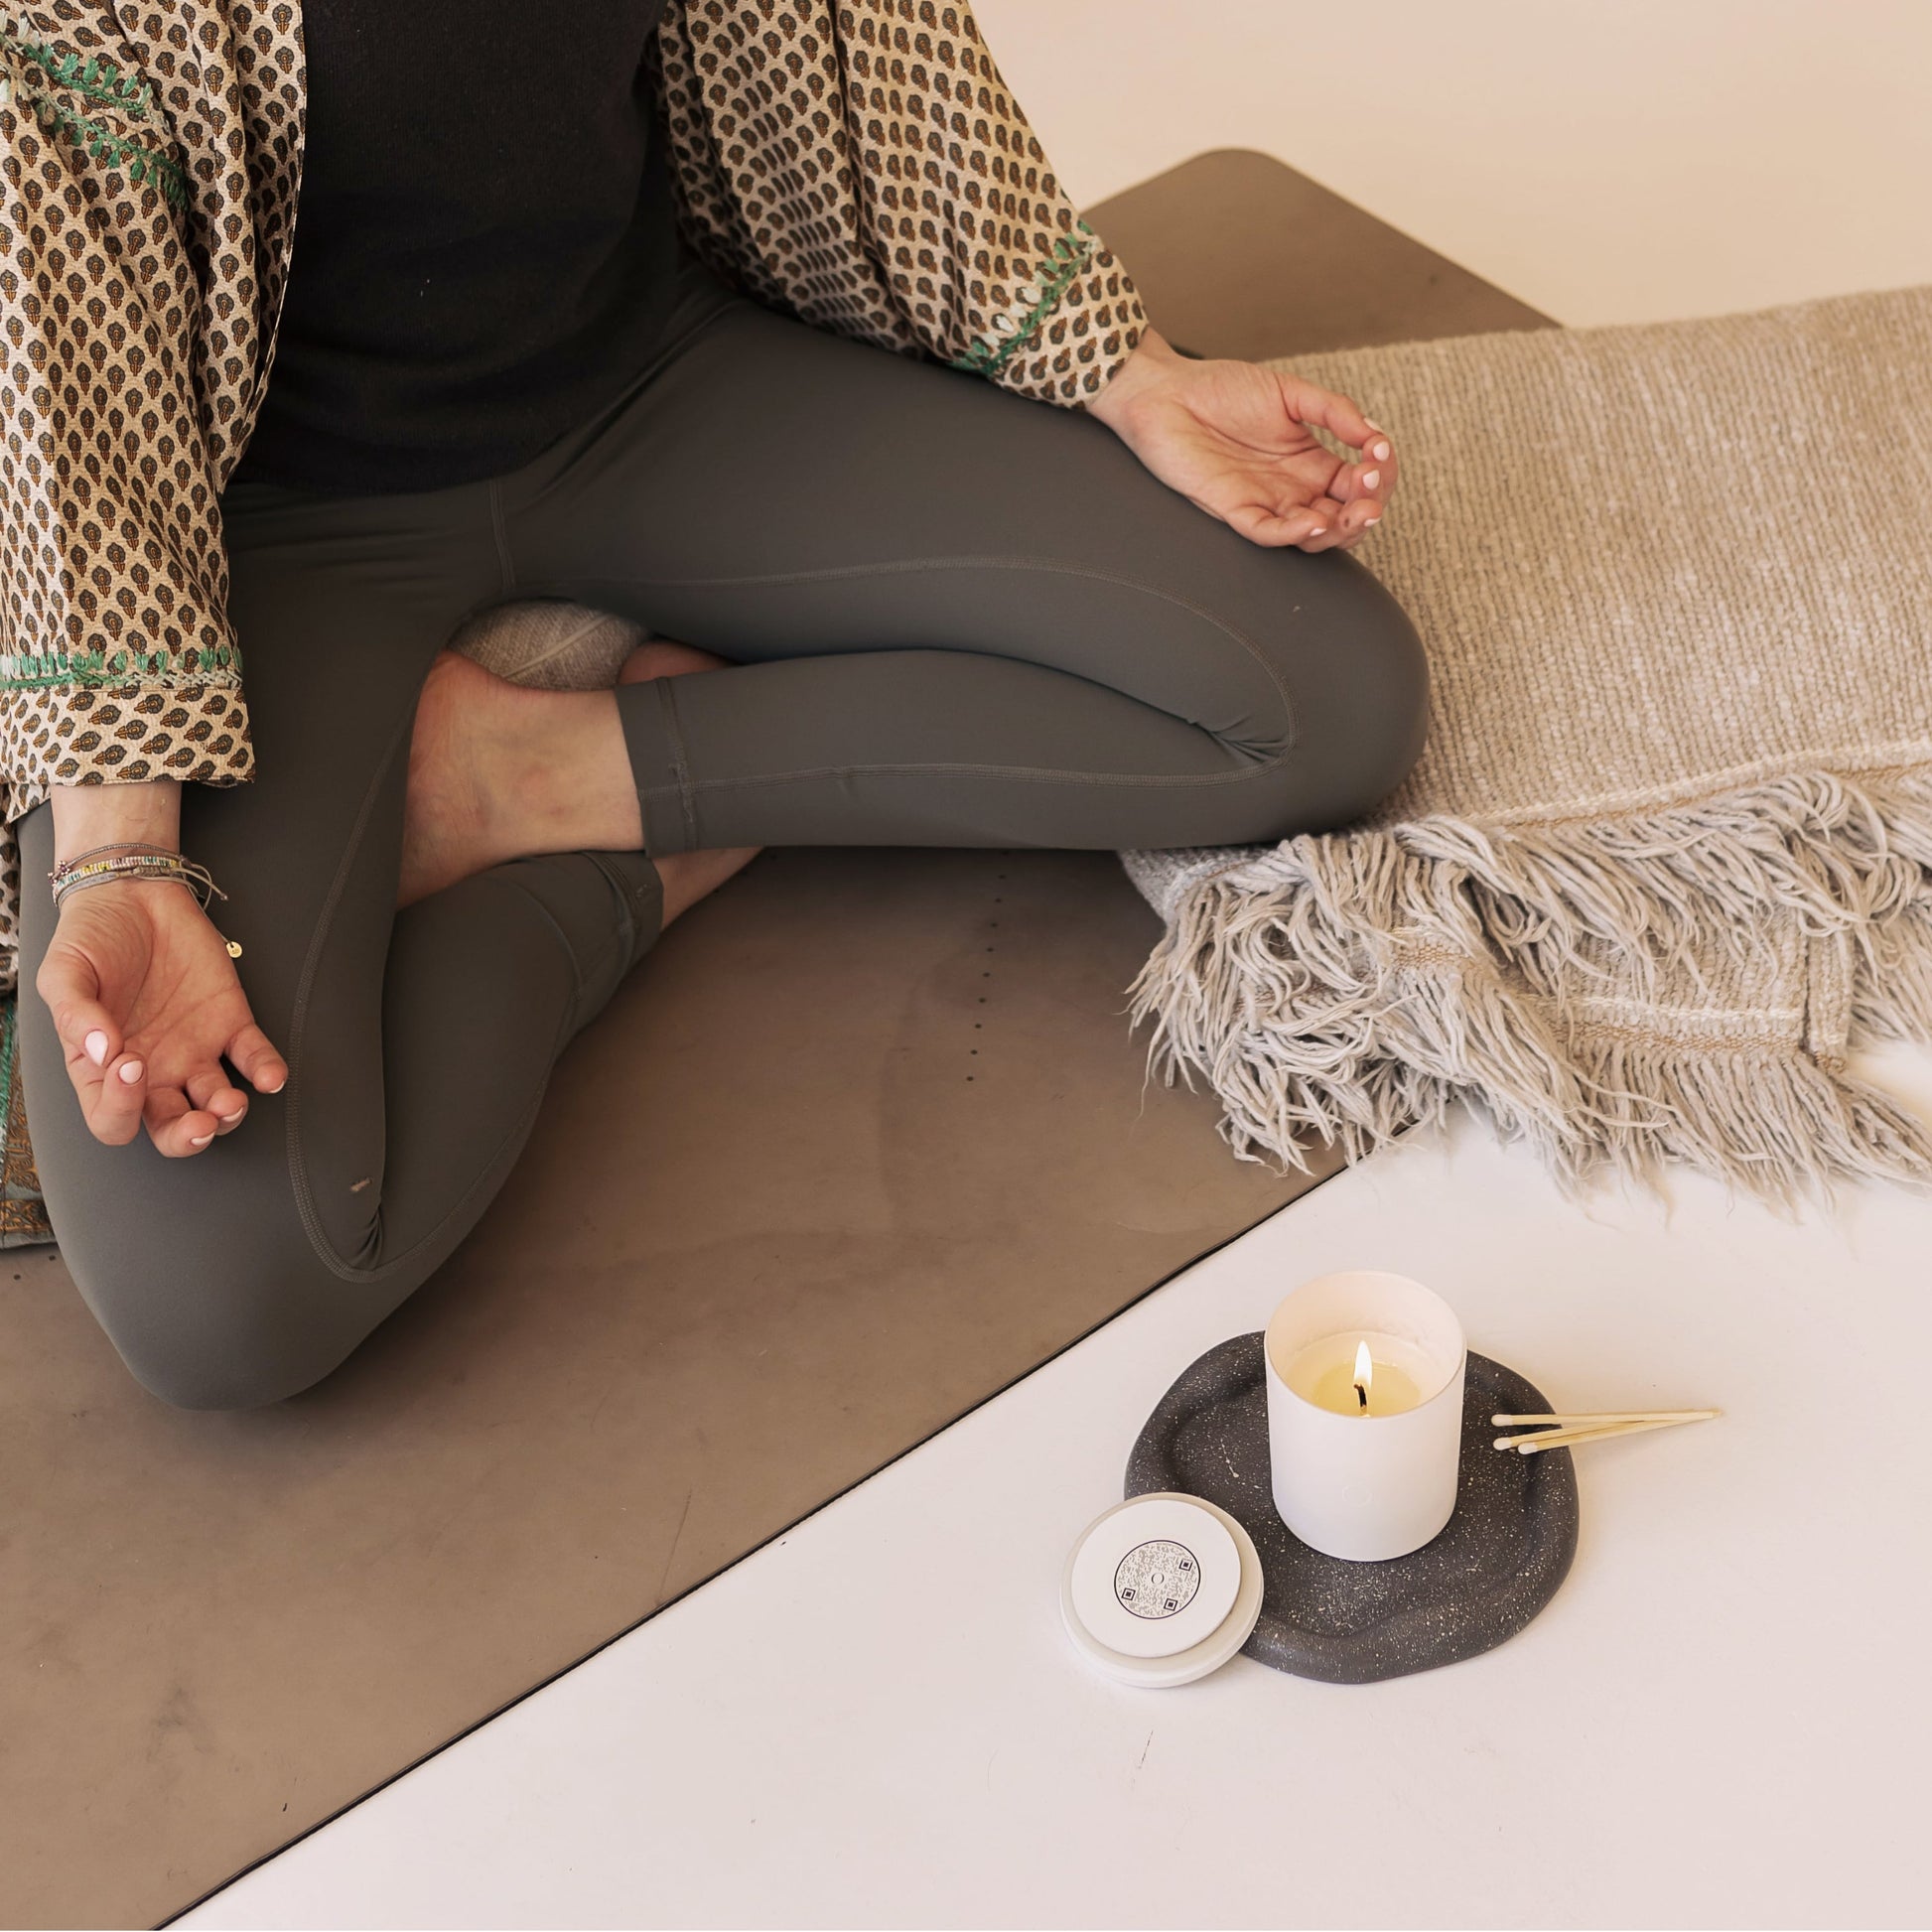 Shō-moon Flow Meditation Candle and someone meditating with a candle